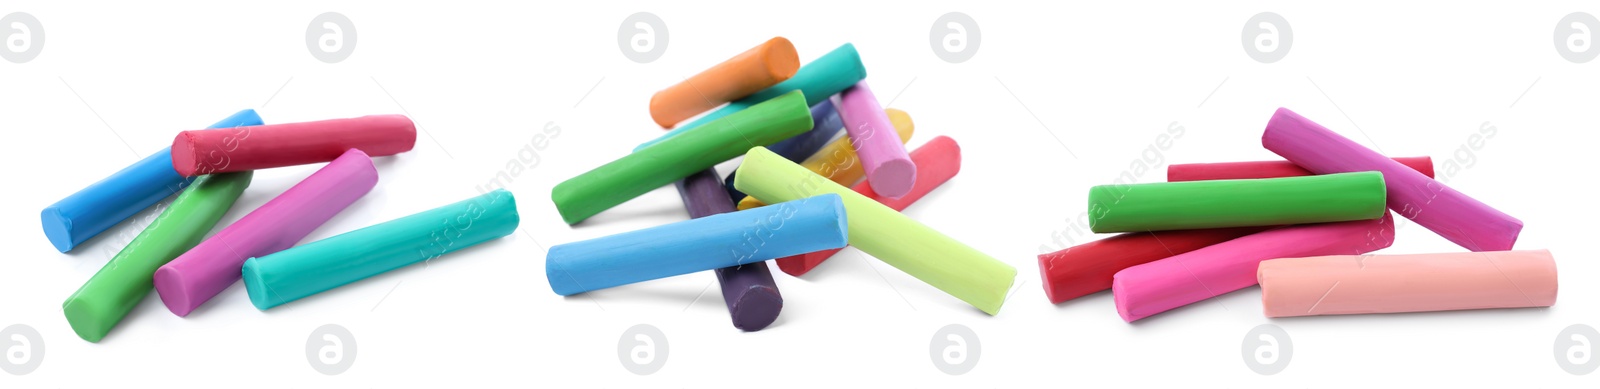 Image of Set with different colorful plasticine pieces on white background. Banner design 